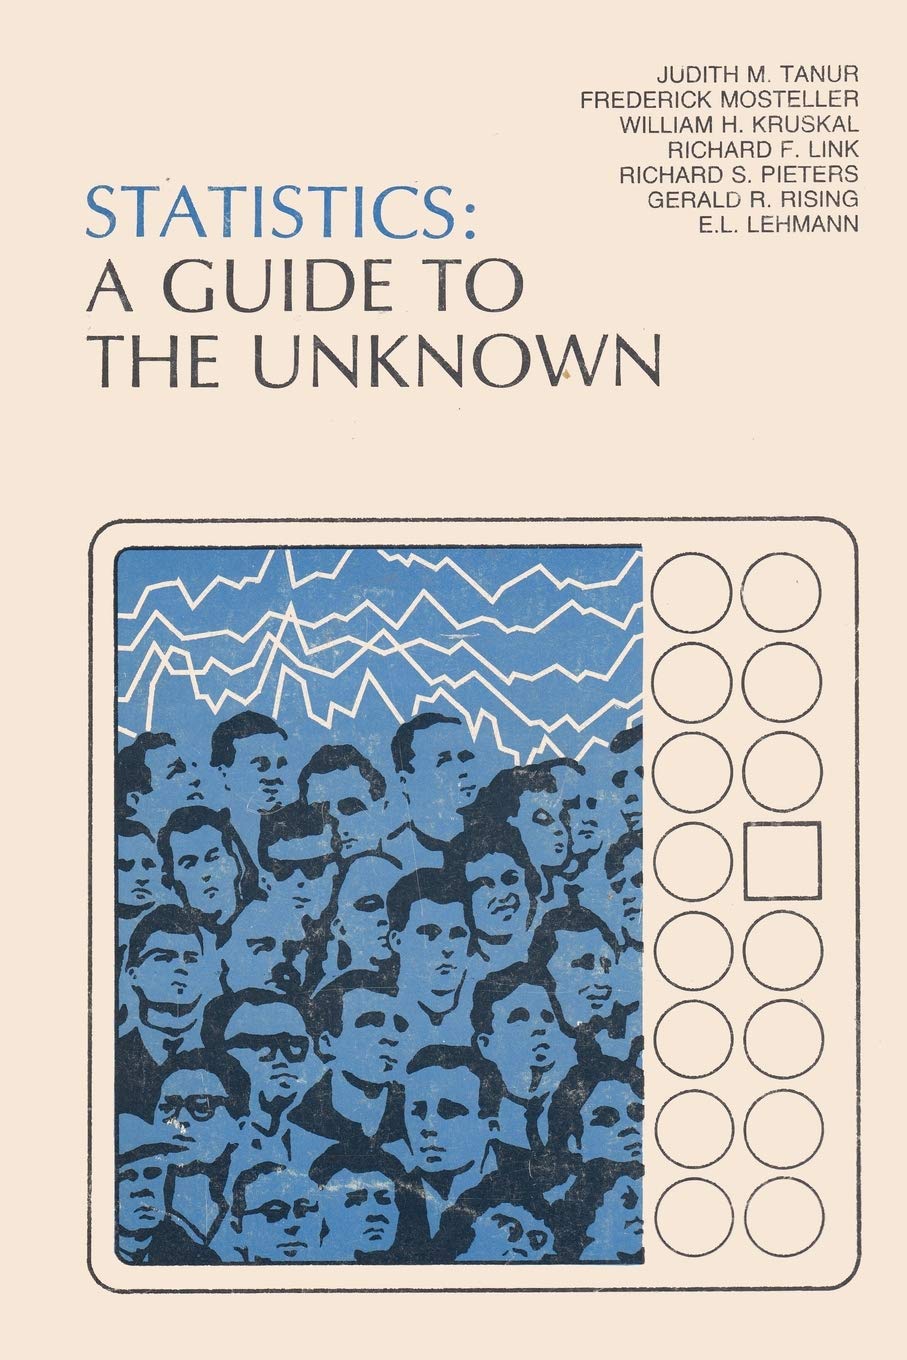 STATISTICS : A GUIDE TO THE UNKNOWN